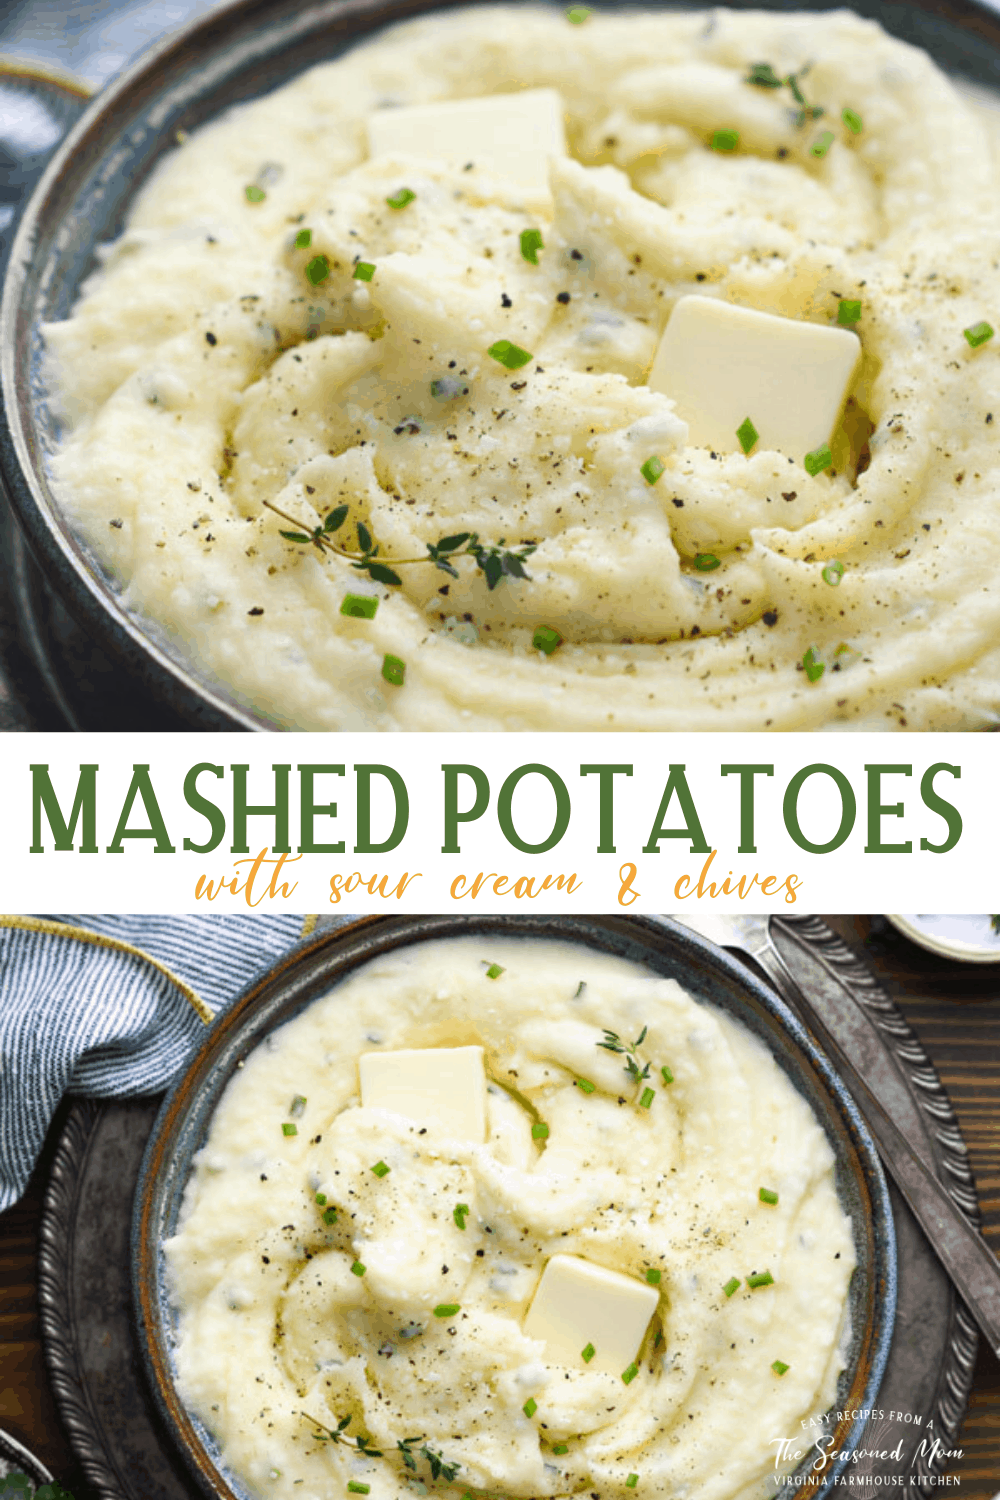 Mashed Potatoes with Sour Cream and Chives - The Seasoned Mom